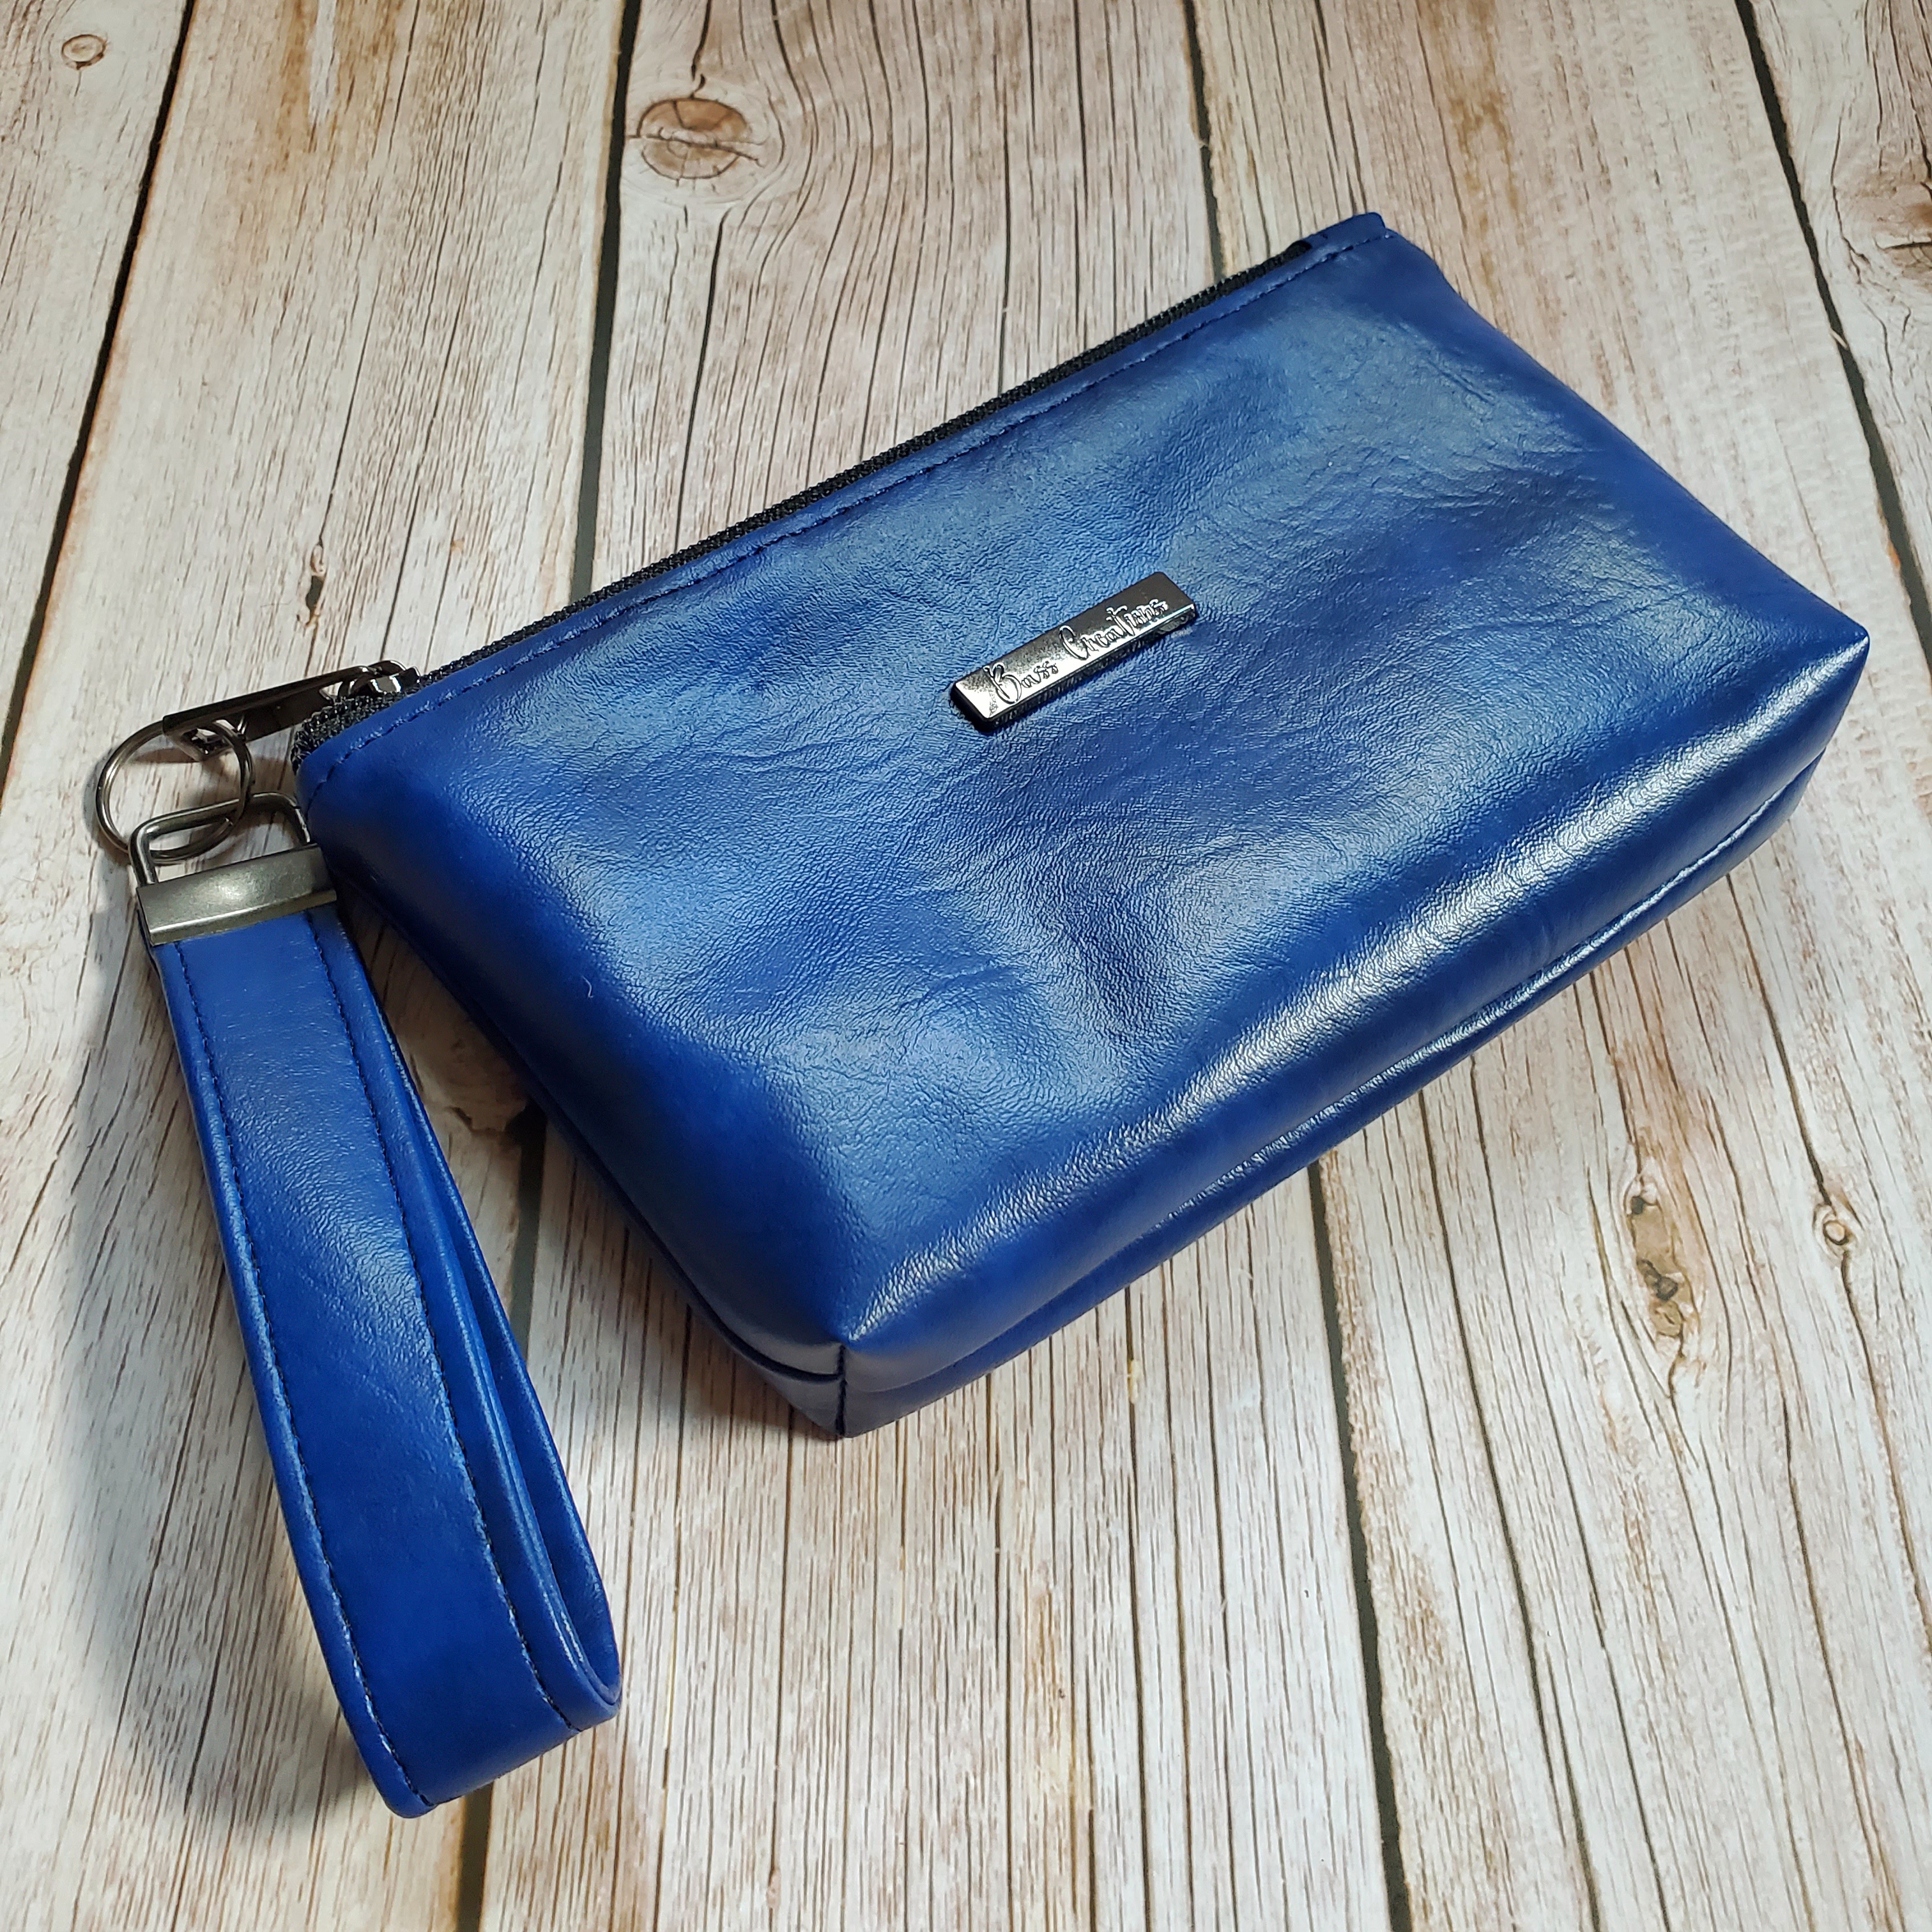 side view of a blue marbled faux leather makeup bag with gunmetal hardware and a gunmetal Bass Creations logo. It also includes a wristlet strap for easy carrying.